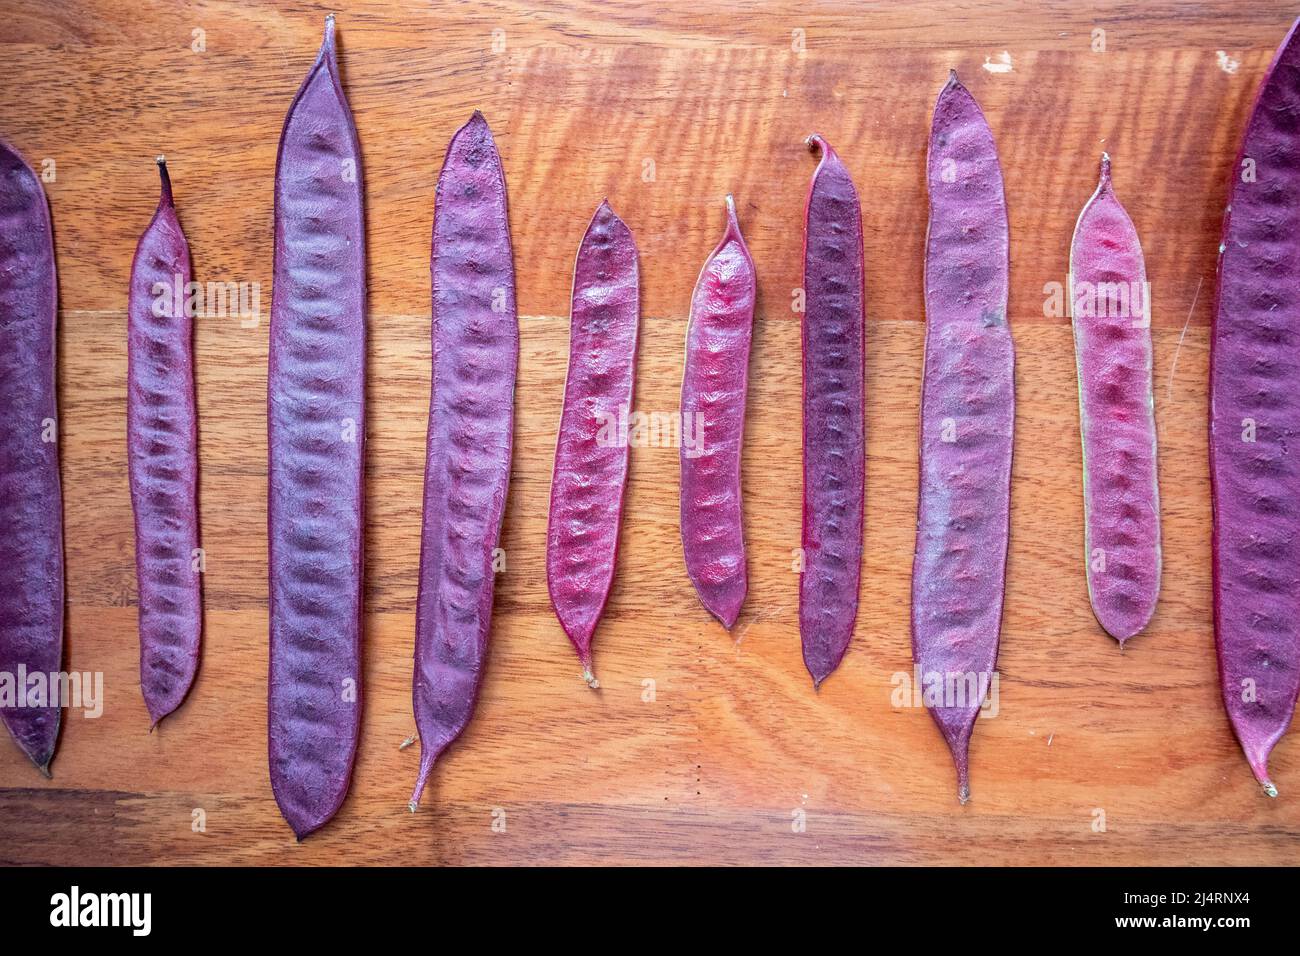 Purple Guaje seed pods arranged on a wood table Stock Photo